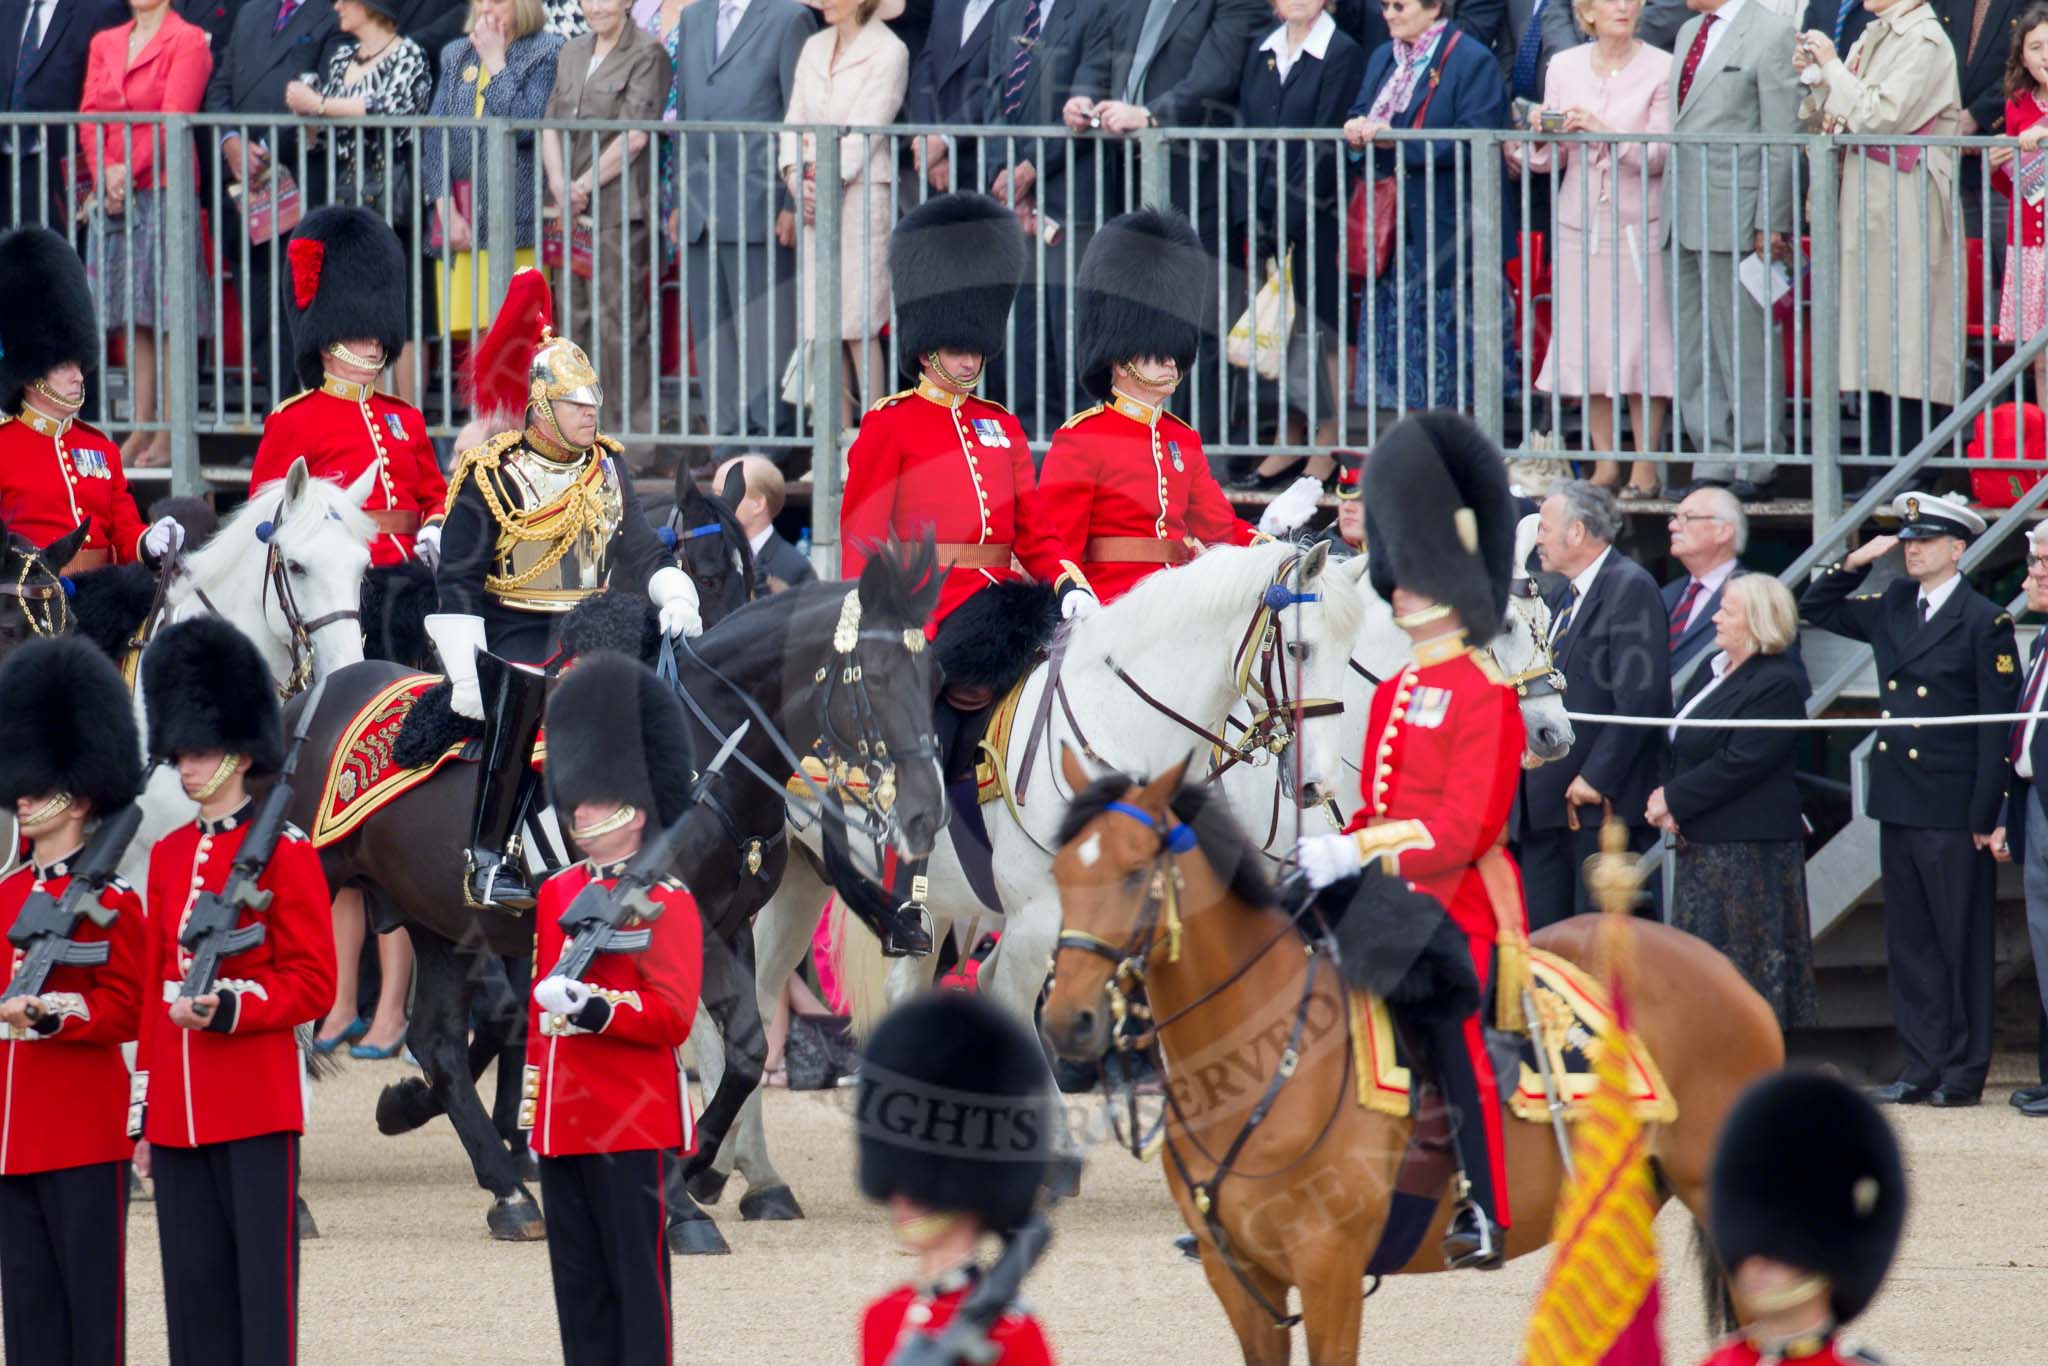 Trooping the Colour 2010: Members of the Royal Procession arriving at Horse Guards Parade. 

On horseback, in front, Lieutenant Colonel J S Olivier,
The Blues and Royals.

In the middle, Major G V A Baker, Grenadier Guards.

Behind him, Major J W S Lawrie, Scots Guards.

In the next row, and further left in the photo, Colonel T C S Bonas, Welsh Guards, and Lt Col J B O'Gorman, Irish Guards.

They are riding along the eastern side of the parade ground, next to the Old Admirality Building, spectators are watching from the Inner Line Of Sentries, and one of the stands above..
Horse Guards Parade, Westminster,
London SW1,
Greater London,
United Kingdom,
on 12 June 2010 at 10:59, image #60